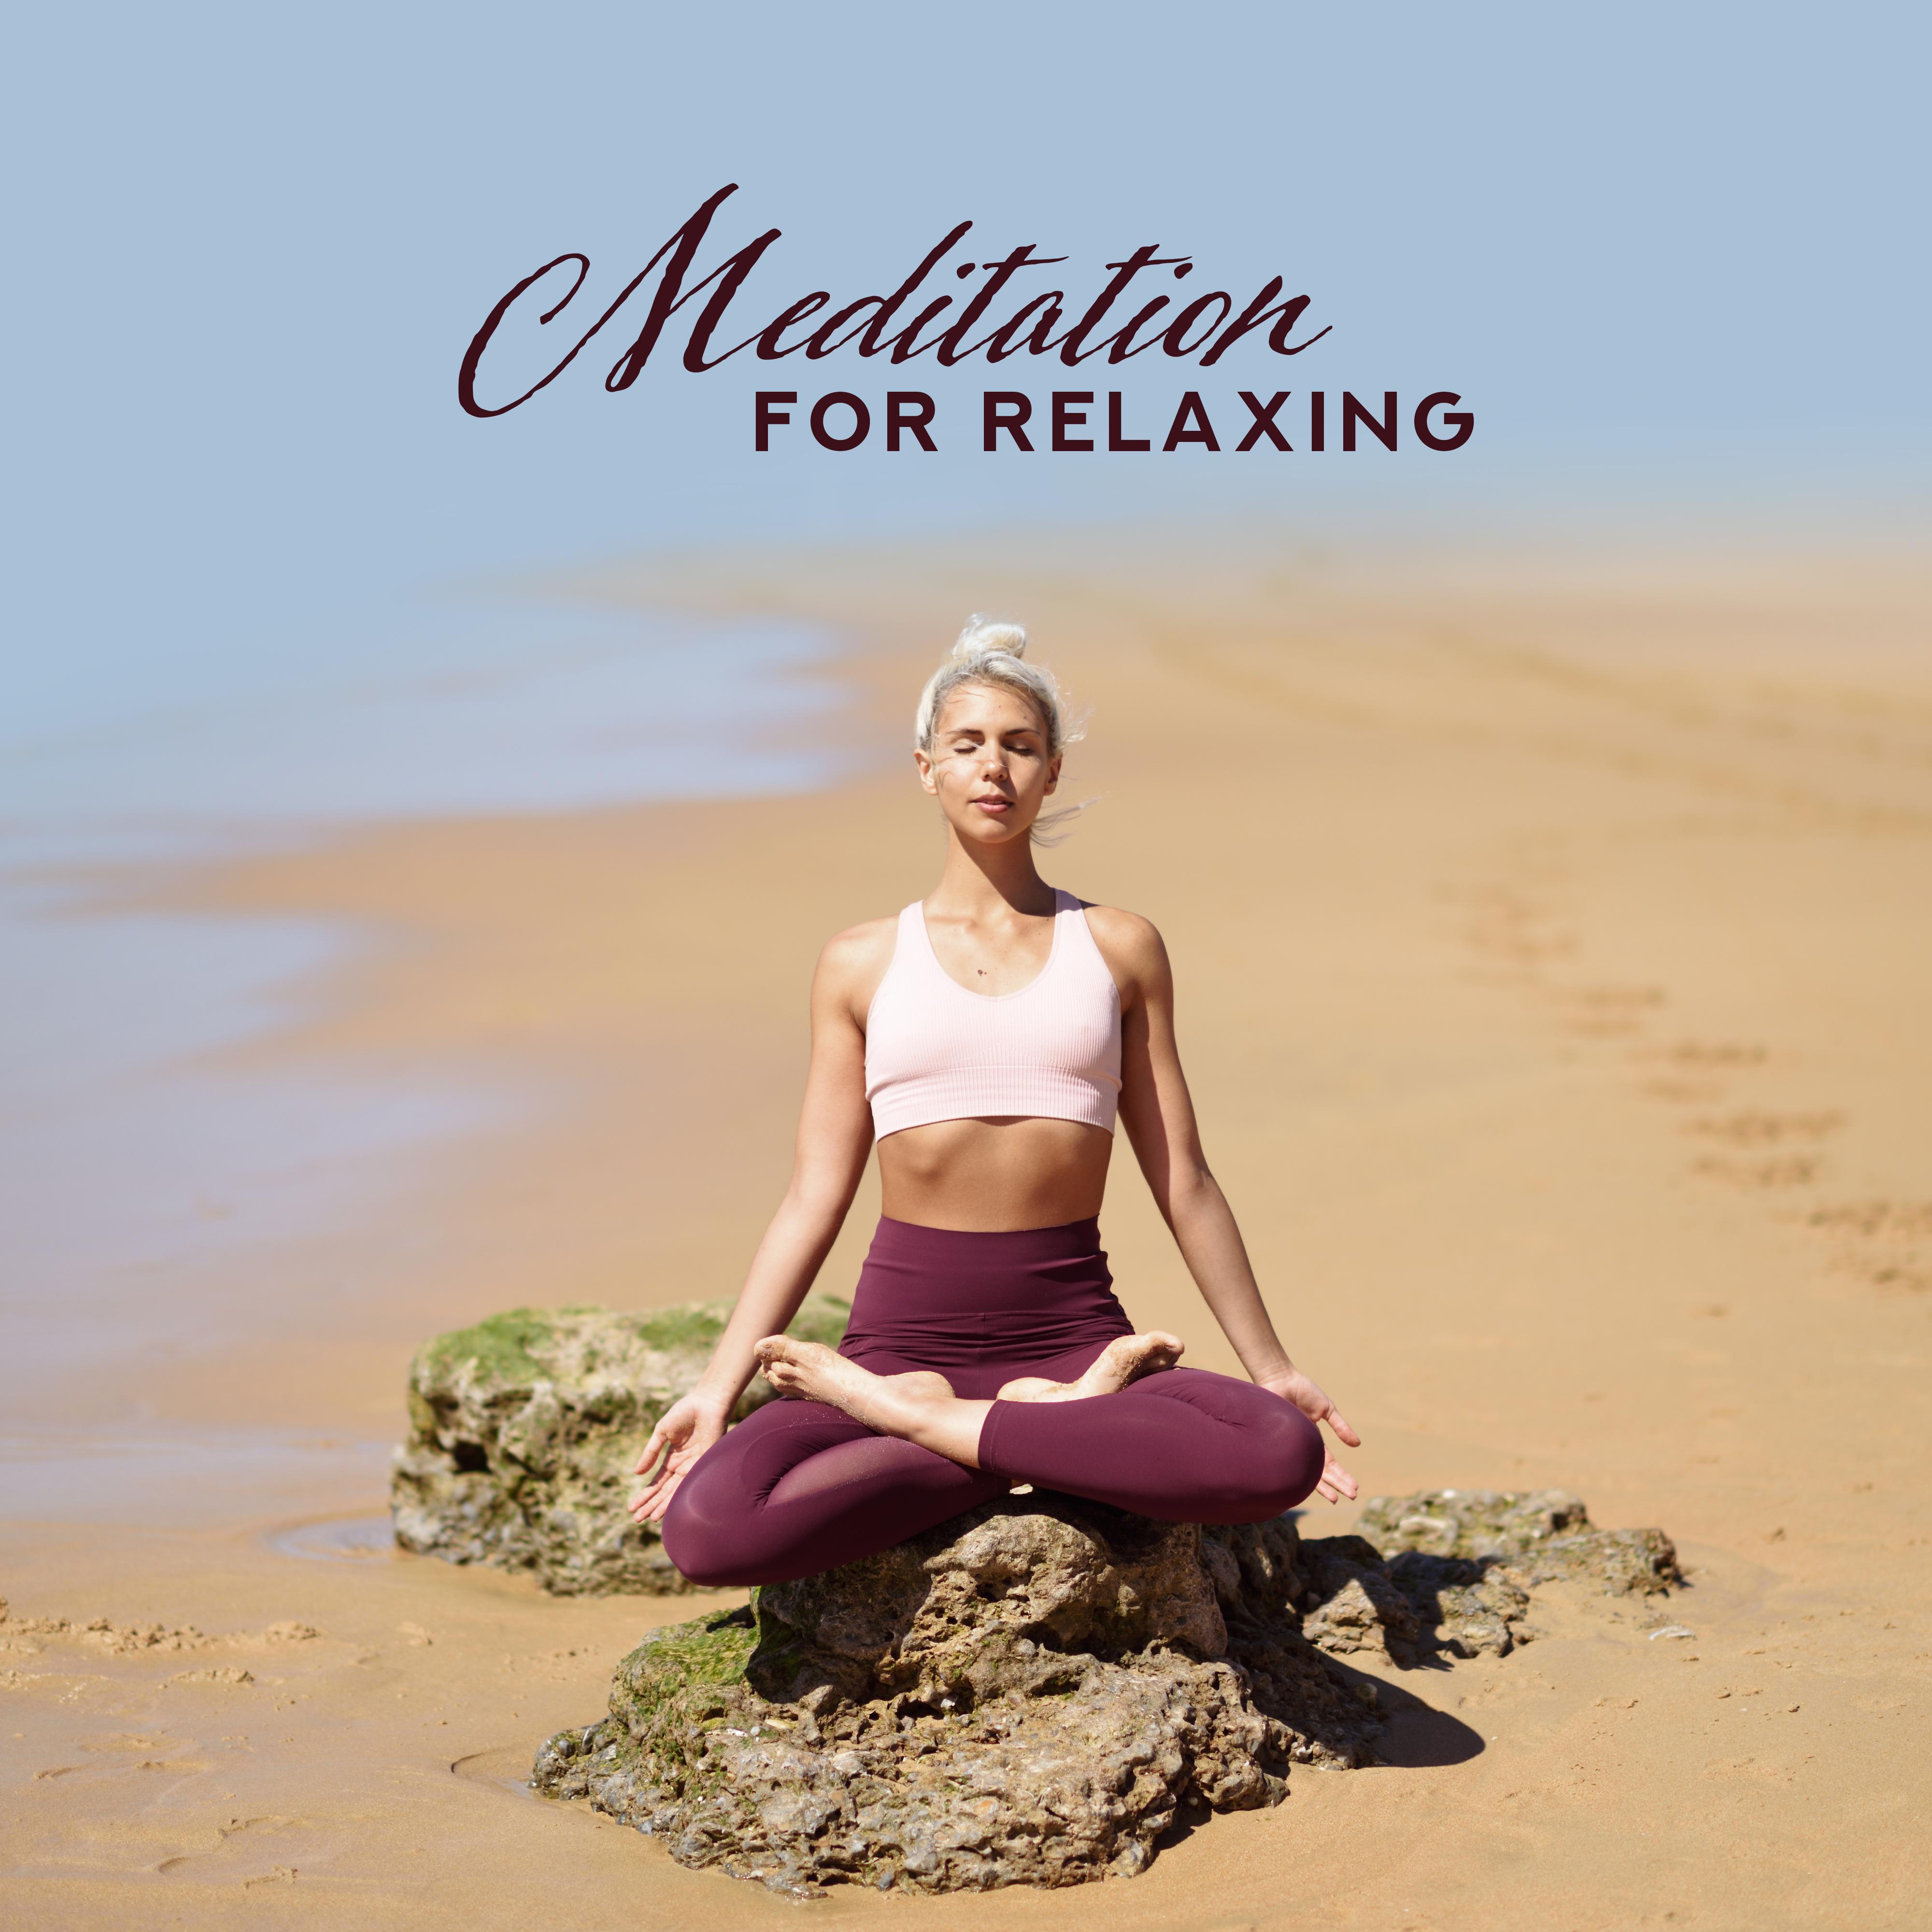 Meditation for Relaxing – Mindfulness Guide, Yoga Music to Relax, Yoga Pose Collection, Yoga Training, Deep Meditation, Zen, Reiki, Inner Balance